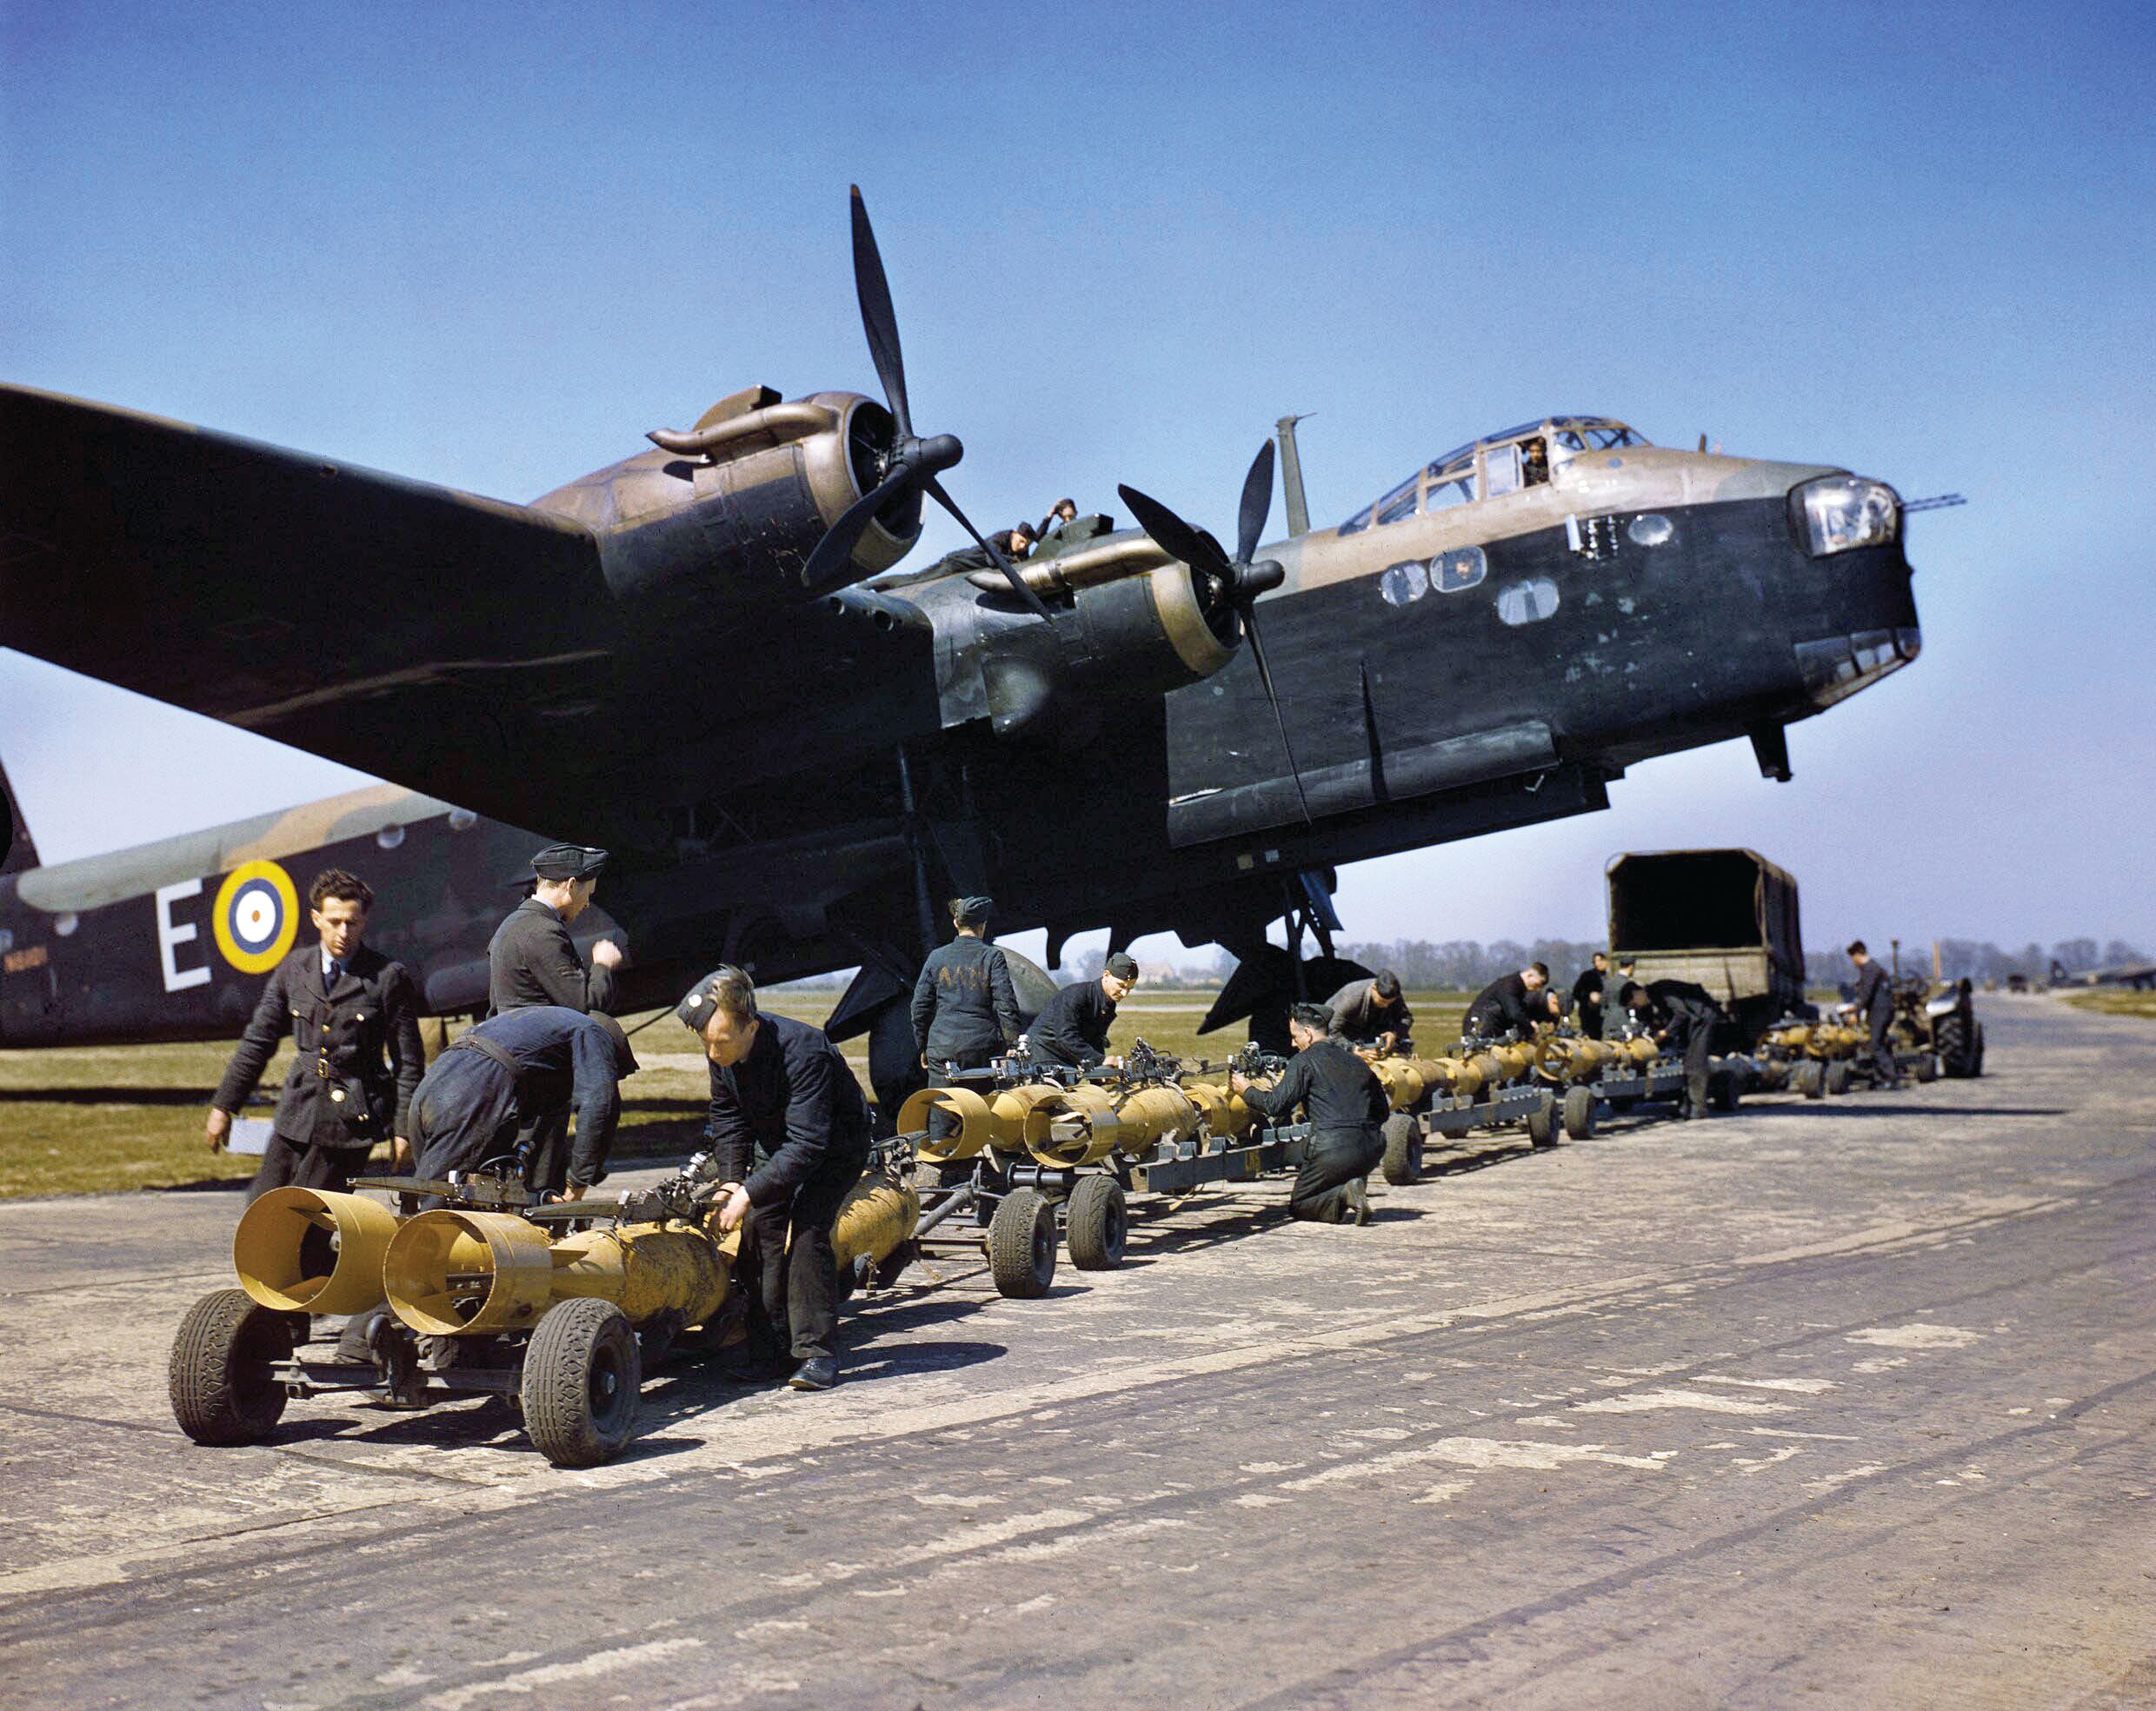 A four-engine Short Stirling bomber sits at an airfield in England while armorers prepare to place the first of 16 250-pound bombs aboard the aircraft for an RAF raid against the Third Reich.